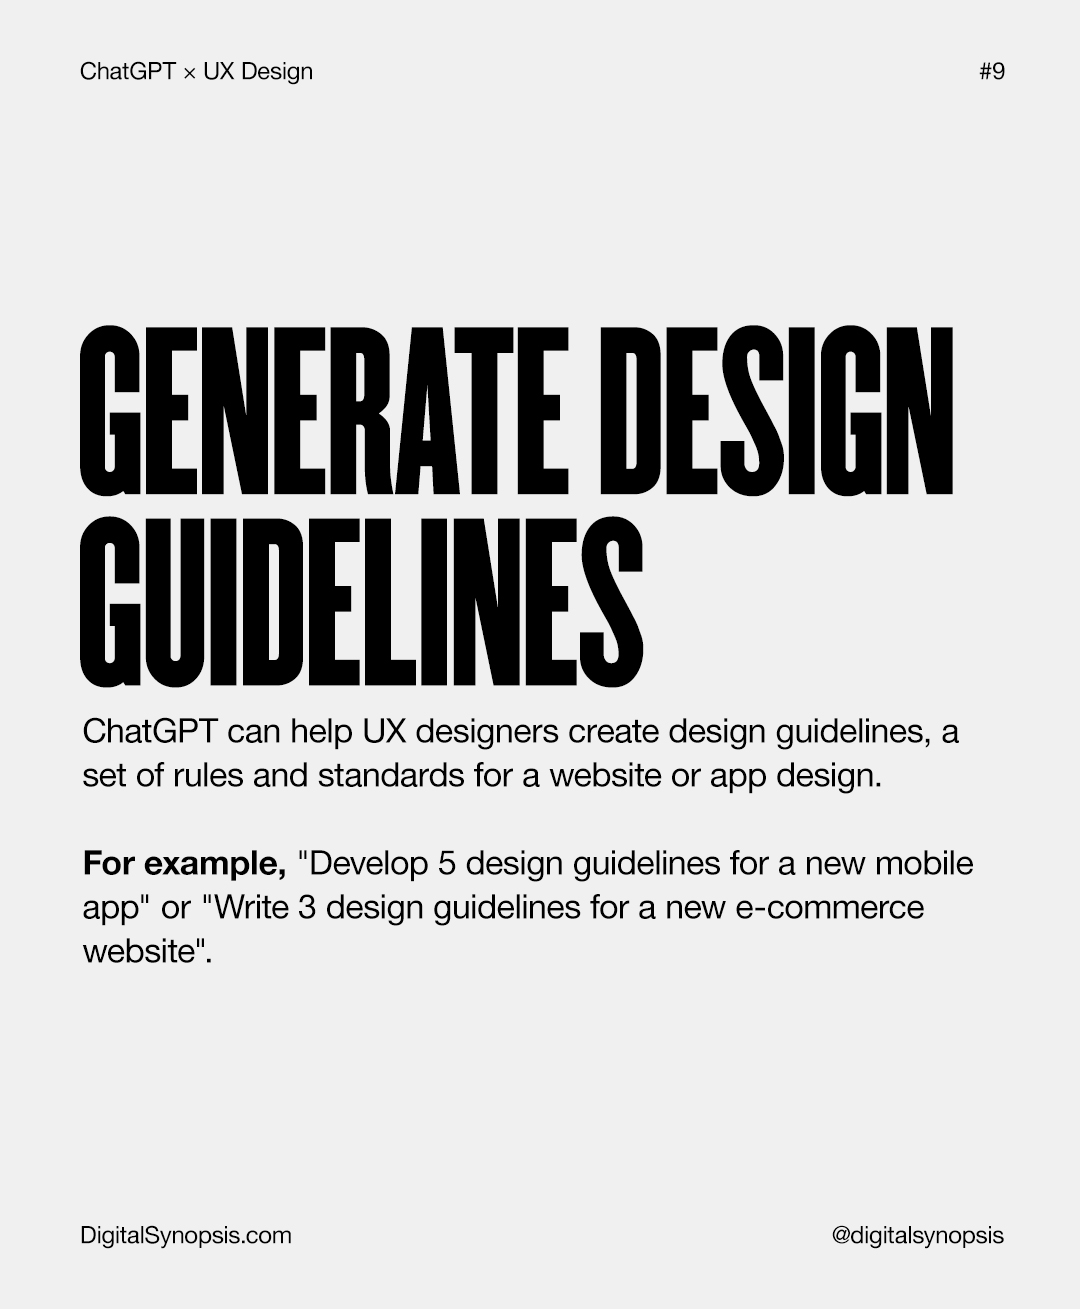 Top 10 Ways To Use ChatGPT For UX Design - Generate Design Guidelines